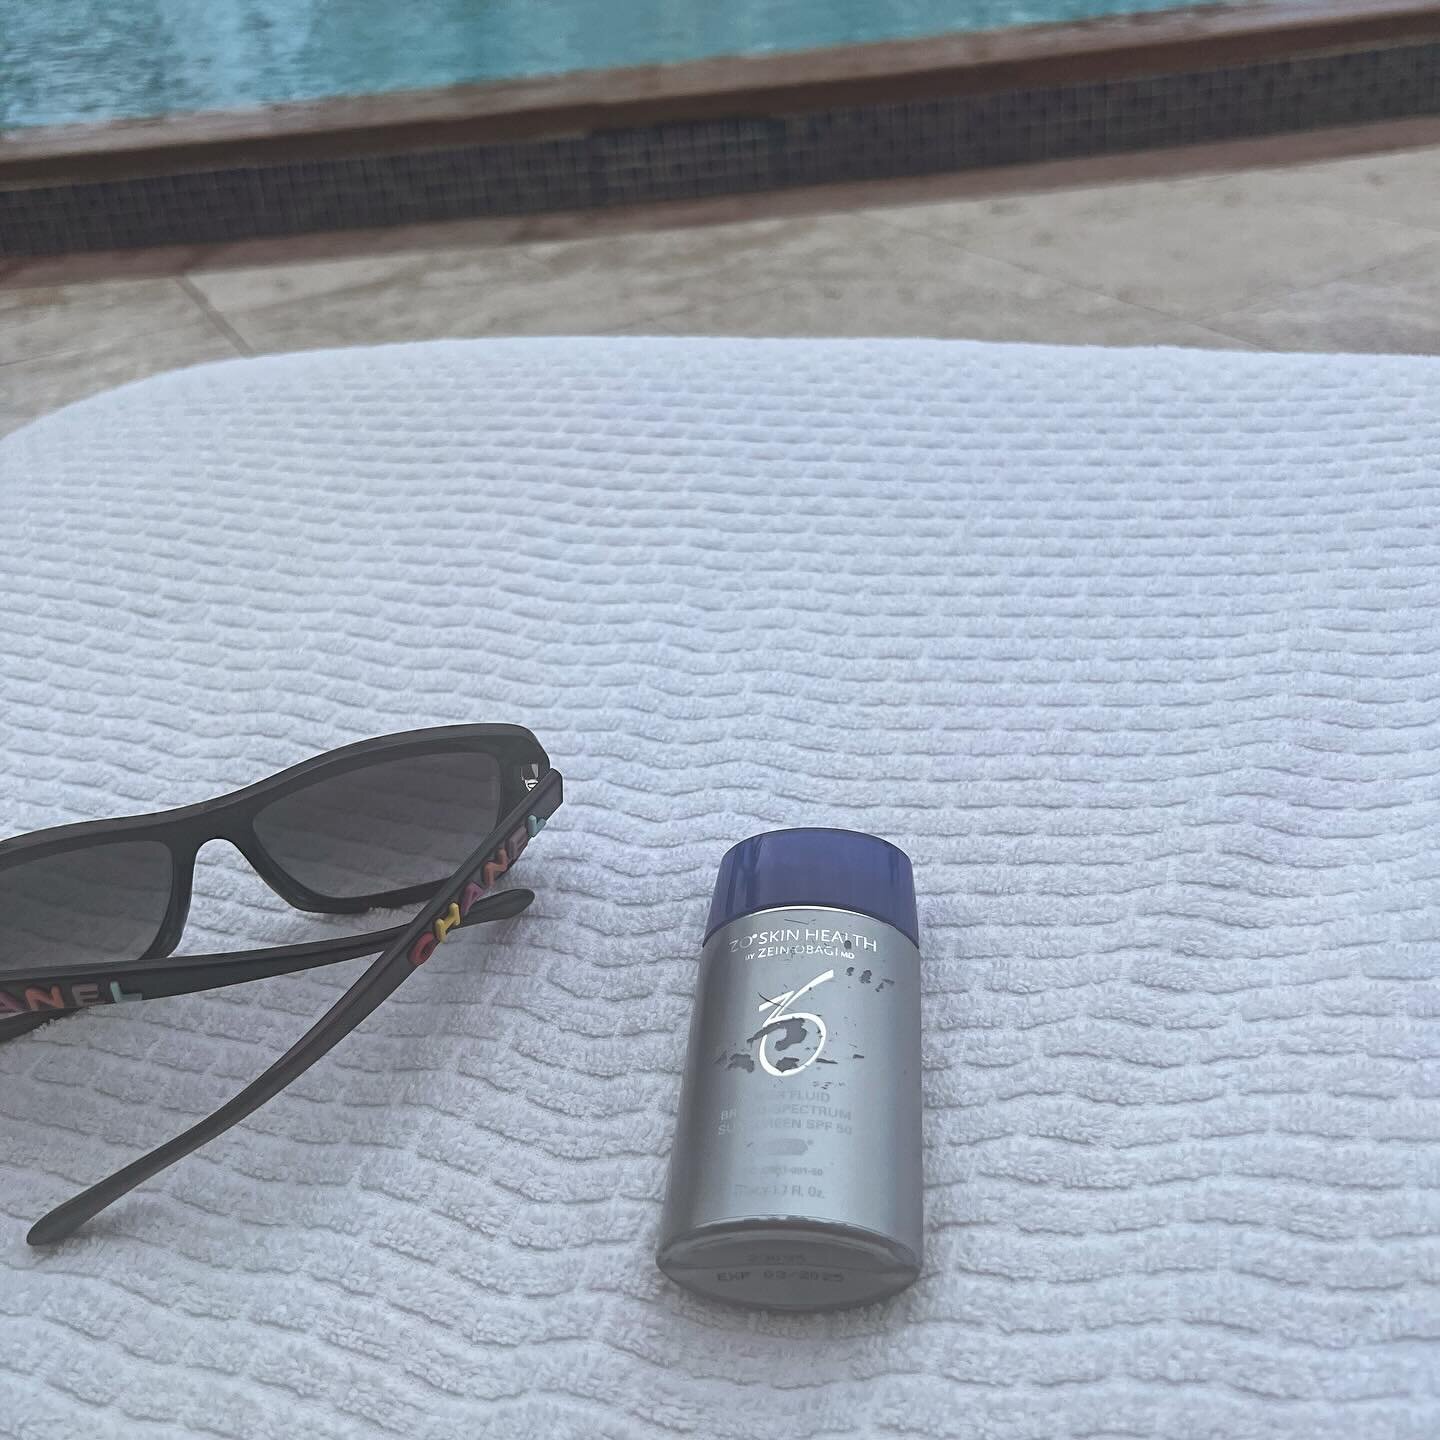 Protect what you inject!!

One of my favorites 

SHEER FLUID BROAD-SPECTRUM SUNSCREEN SPF 50
Ultra-lightweight, Fragrance-free, Triple-Spectrum Protection

#zoskinhealth #spf #sunprotection #medicalgradeskincare #protectwhatyouinject #zoskin 
@zoskin